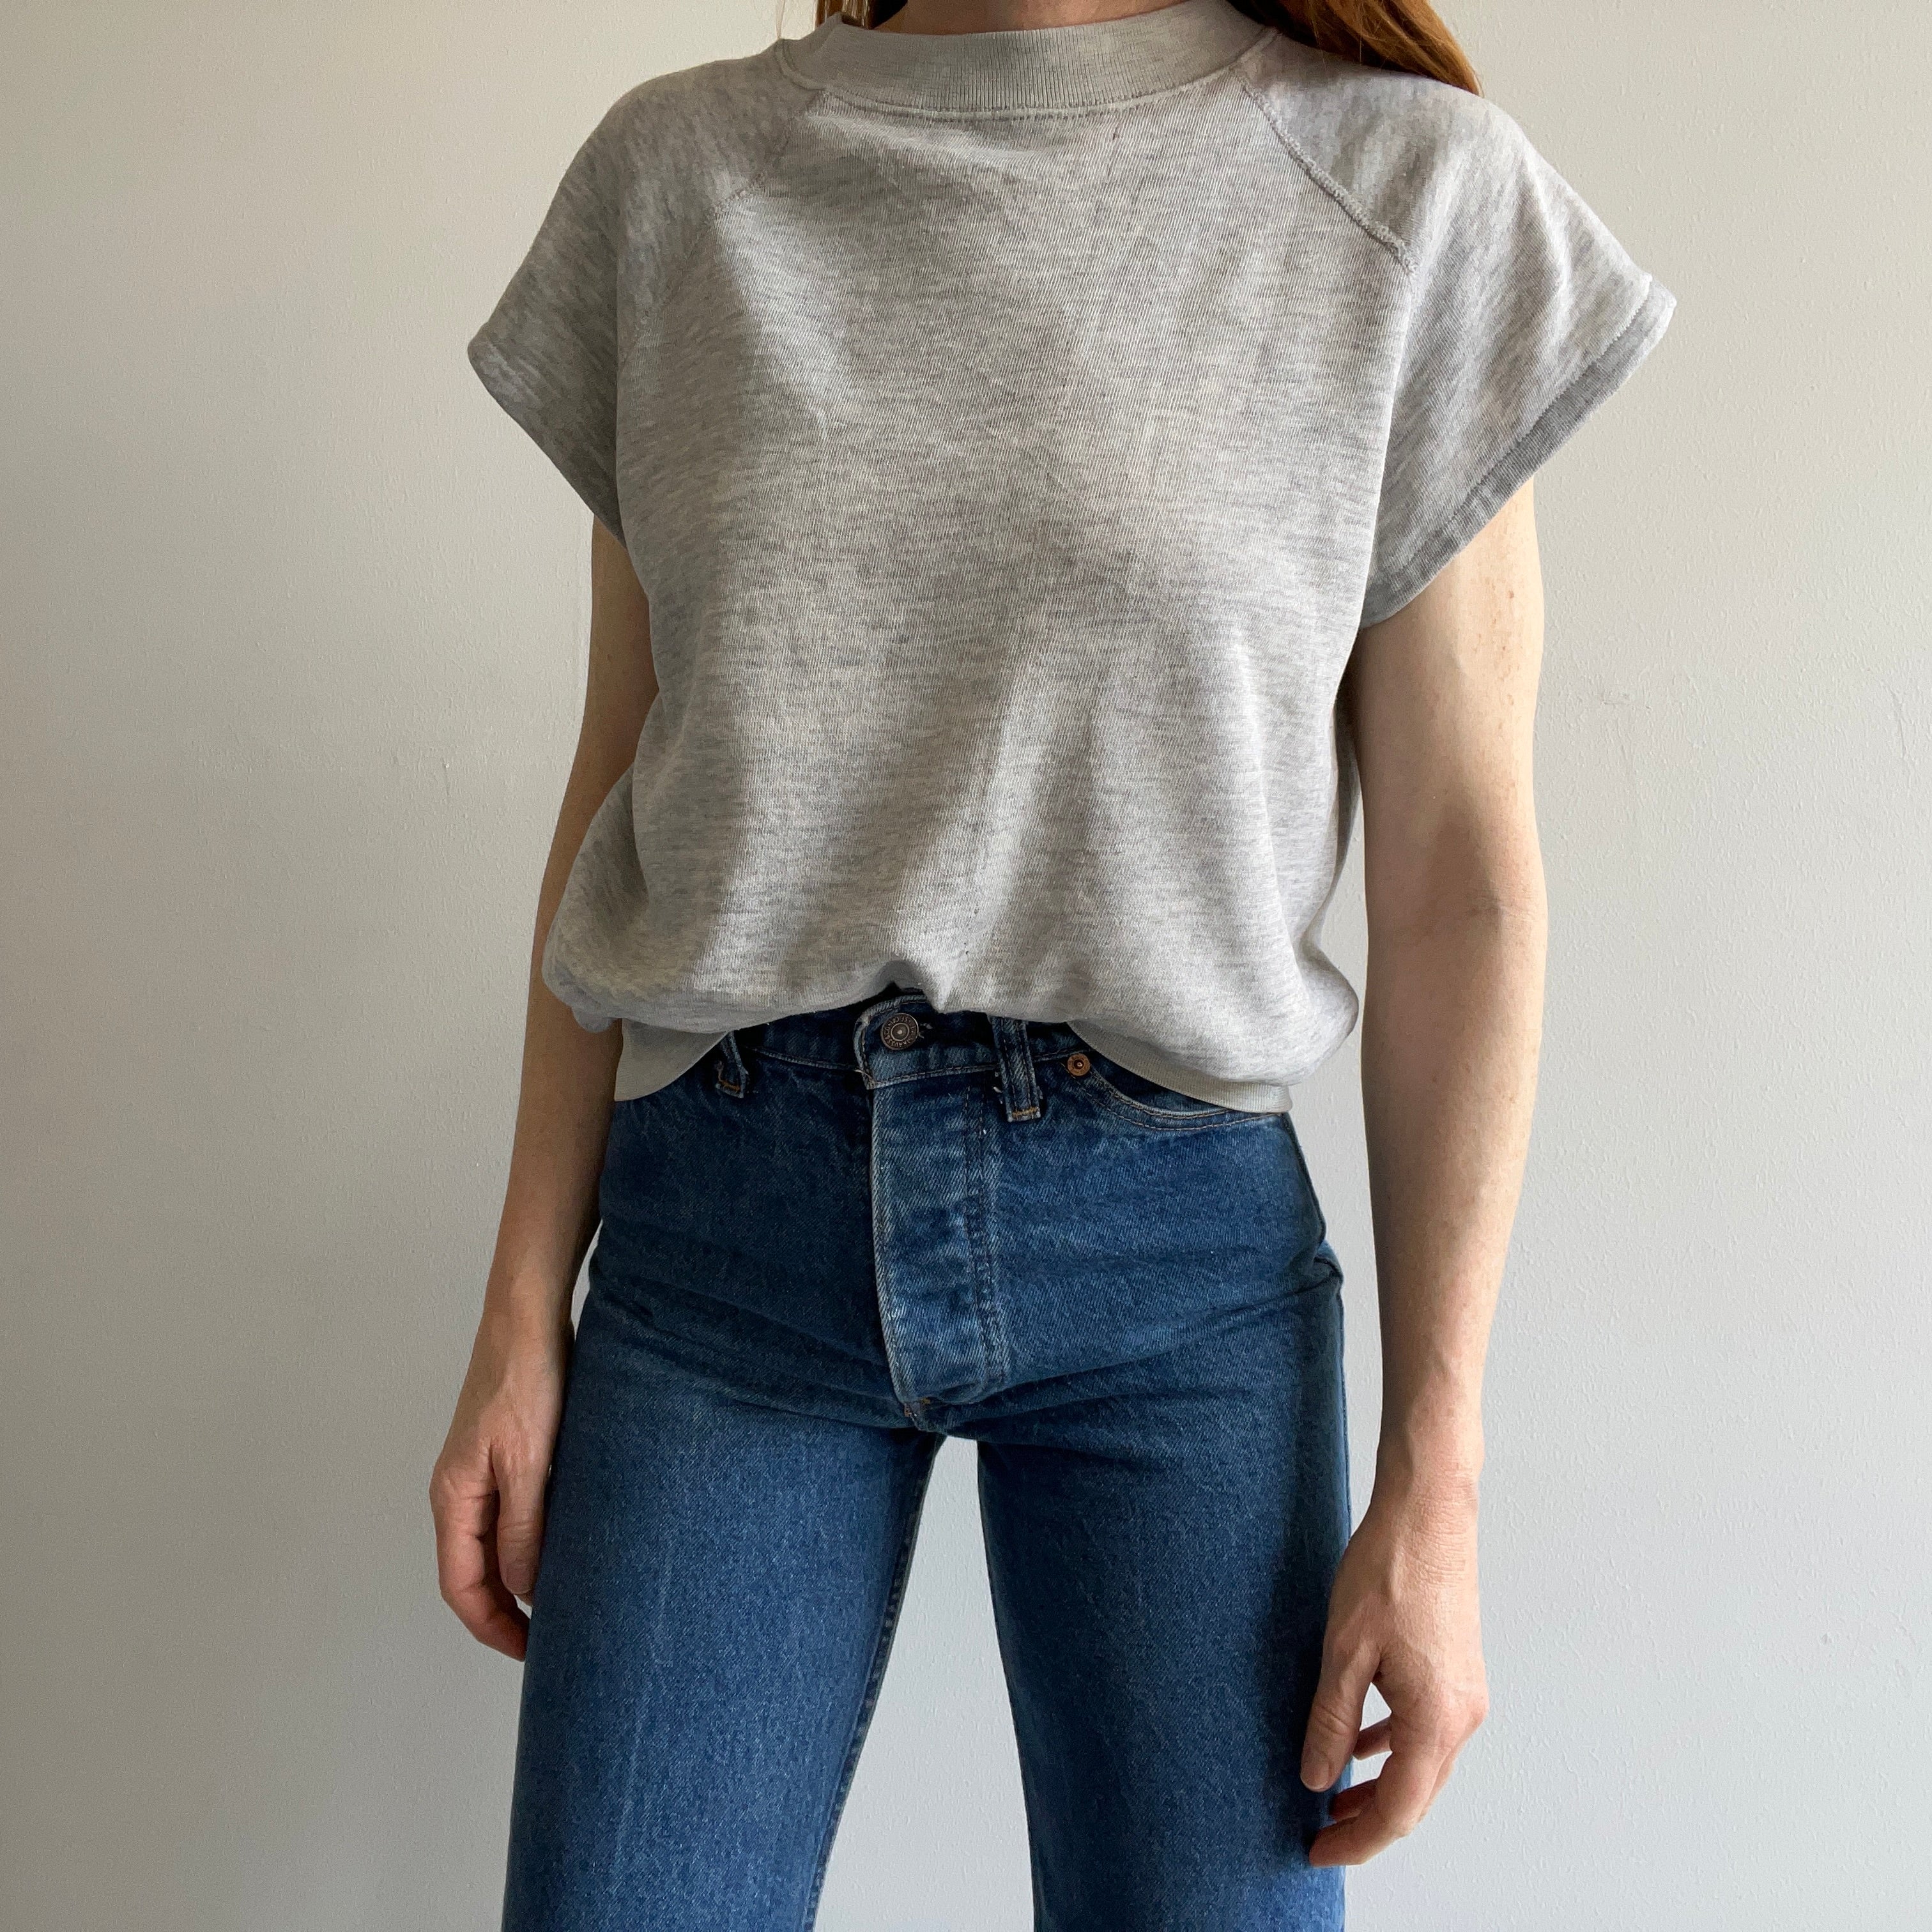 1980/90s Super Thinned Out DIY Blank Gray Warm Up - Paper Thin